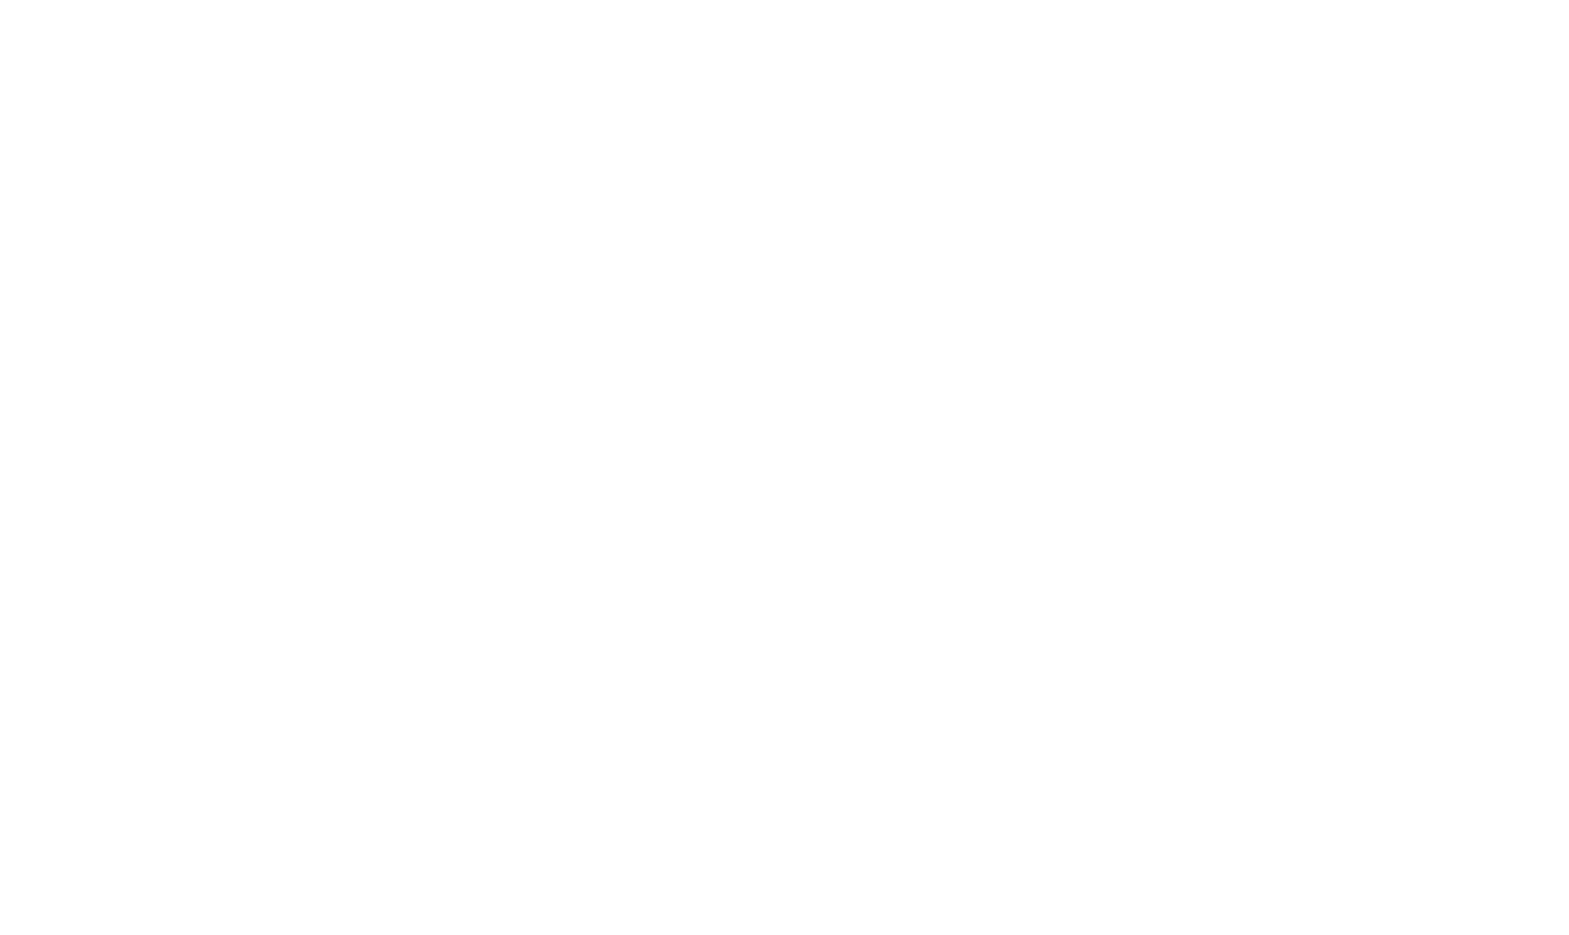 iats-payments-logo-all-white